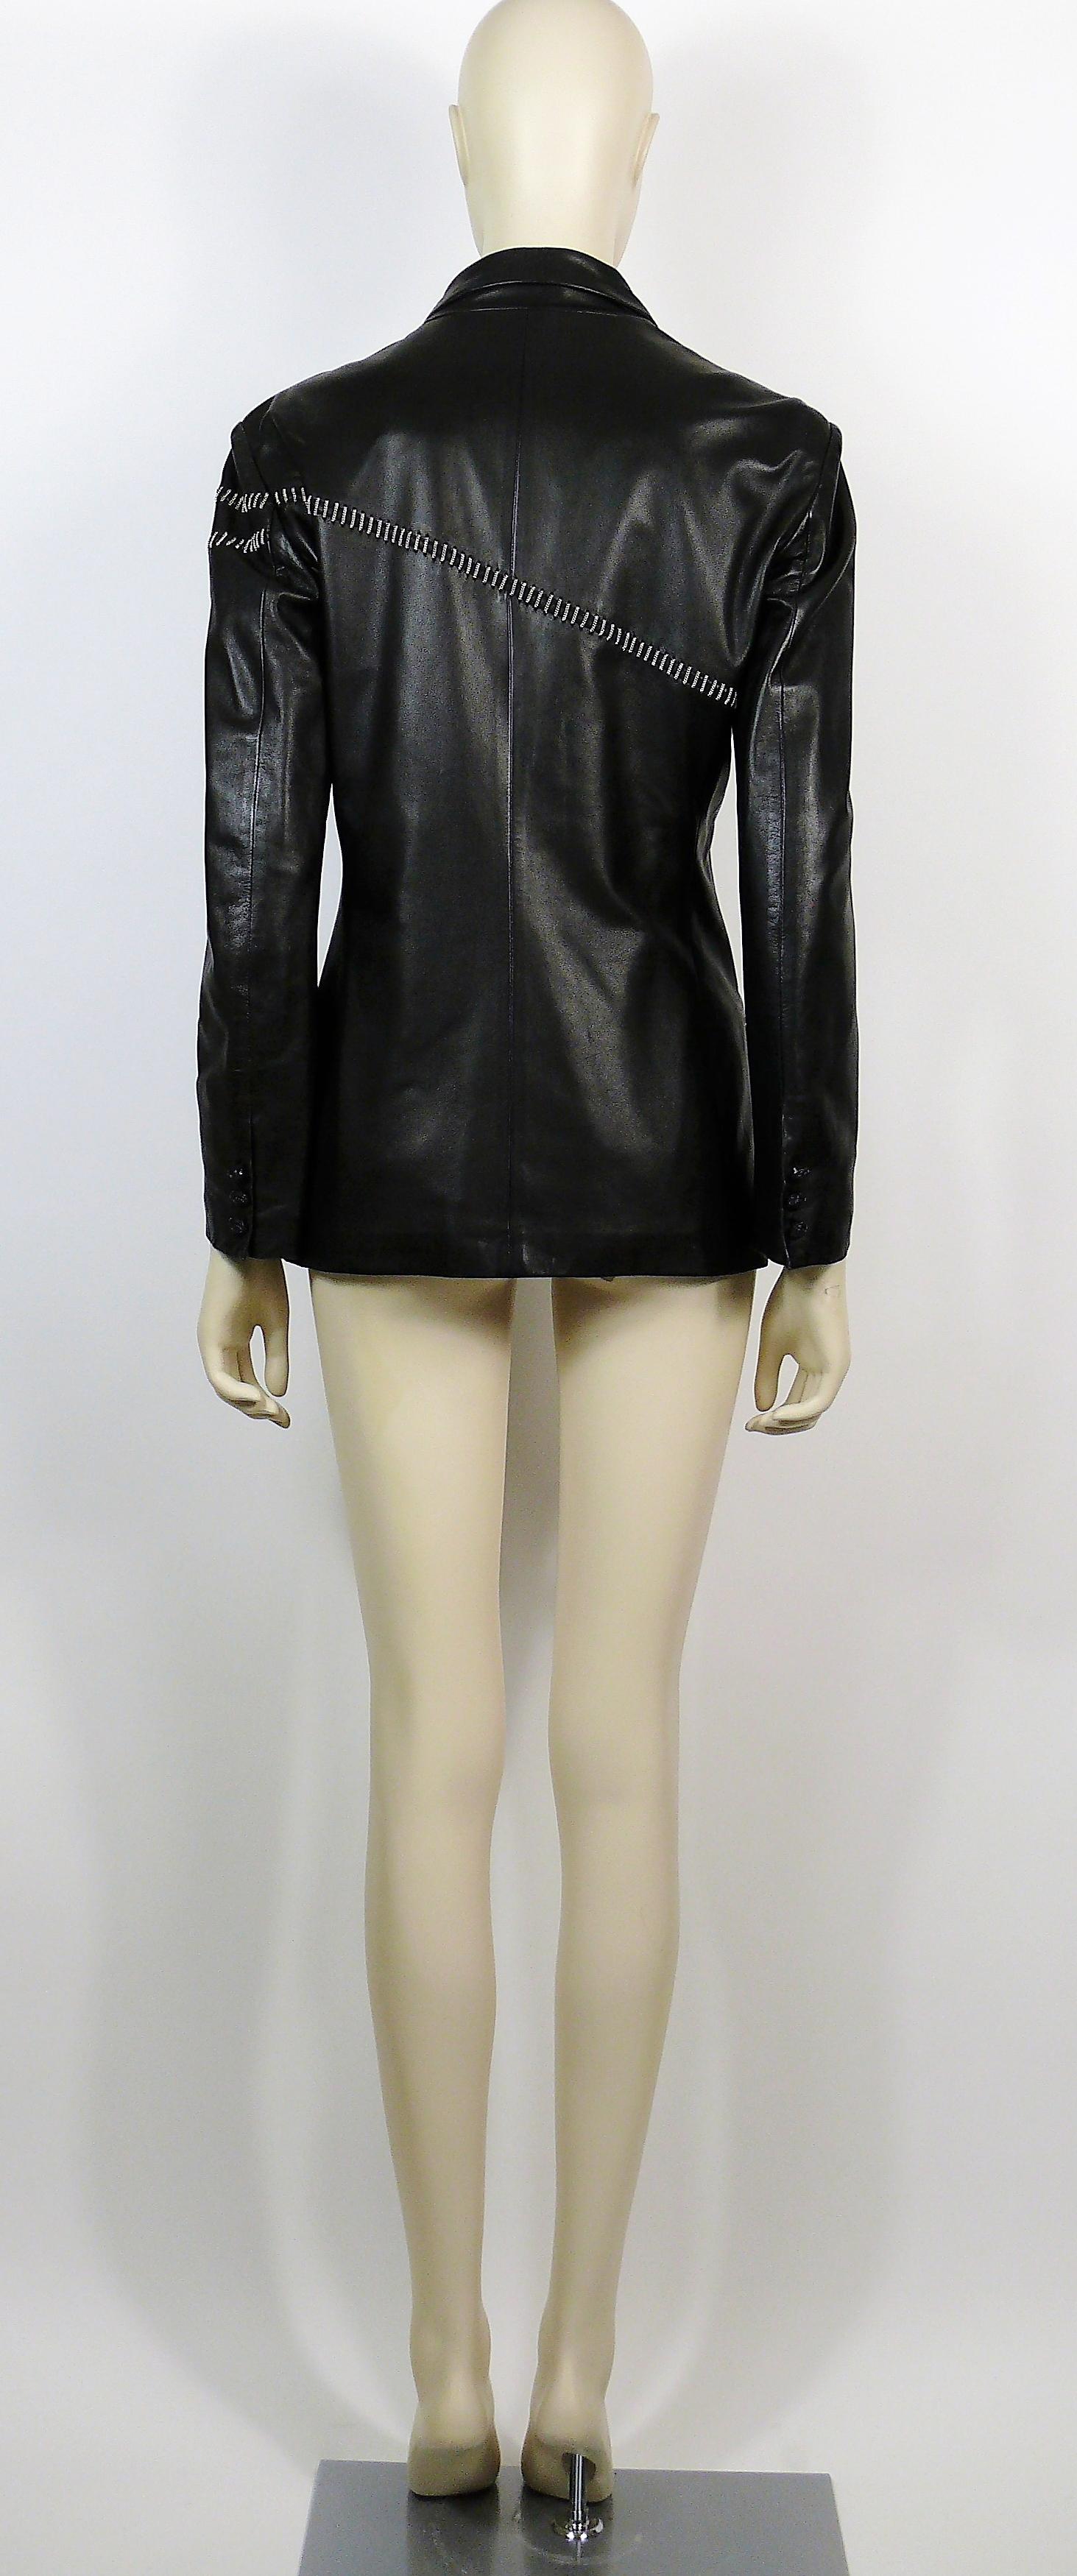 Gianni Versace Vintage Leather Blazer with Chains For Sale 3